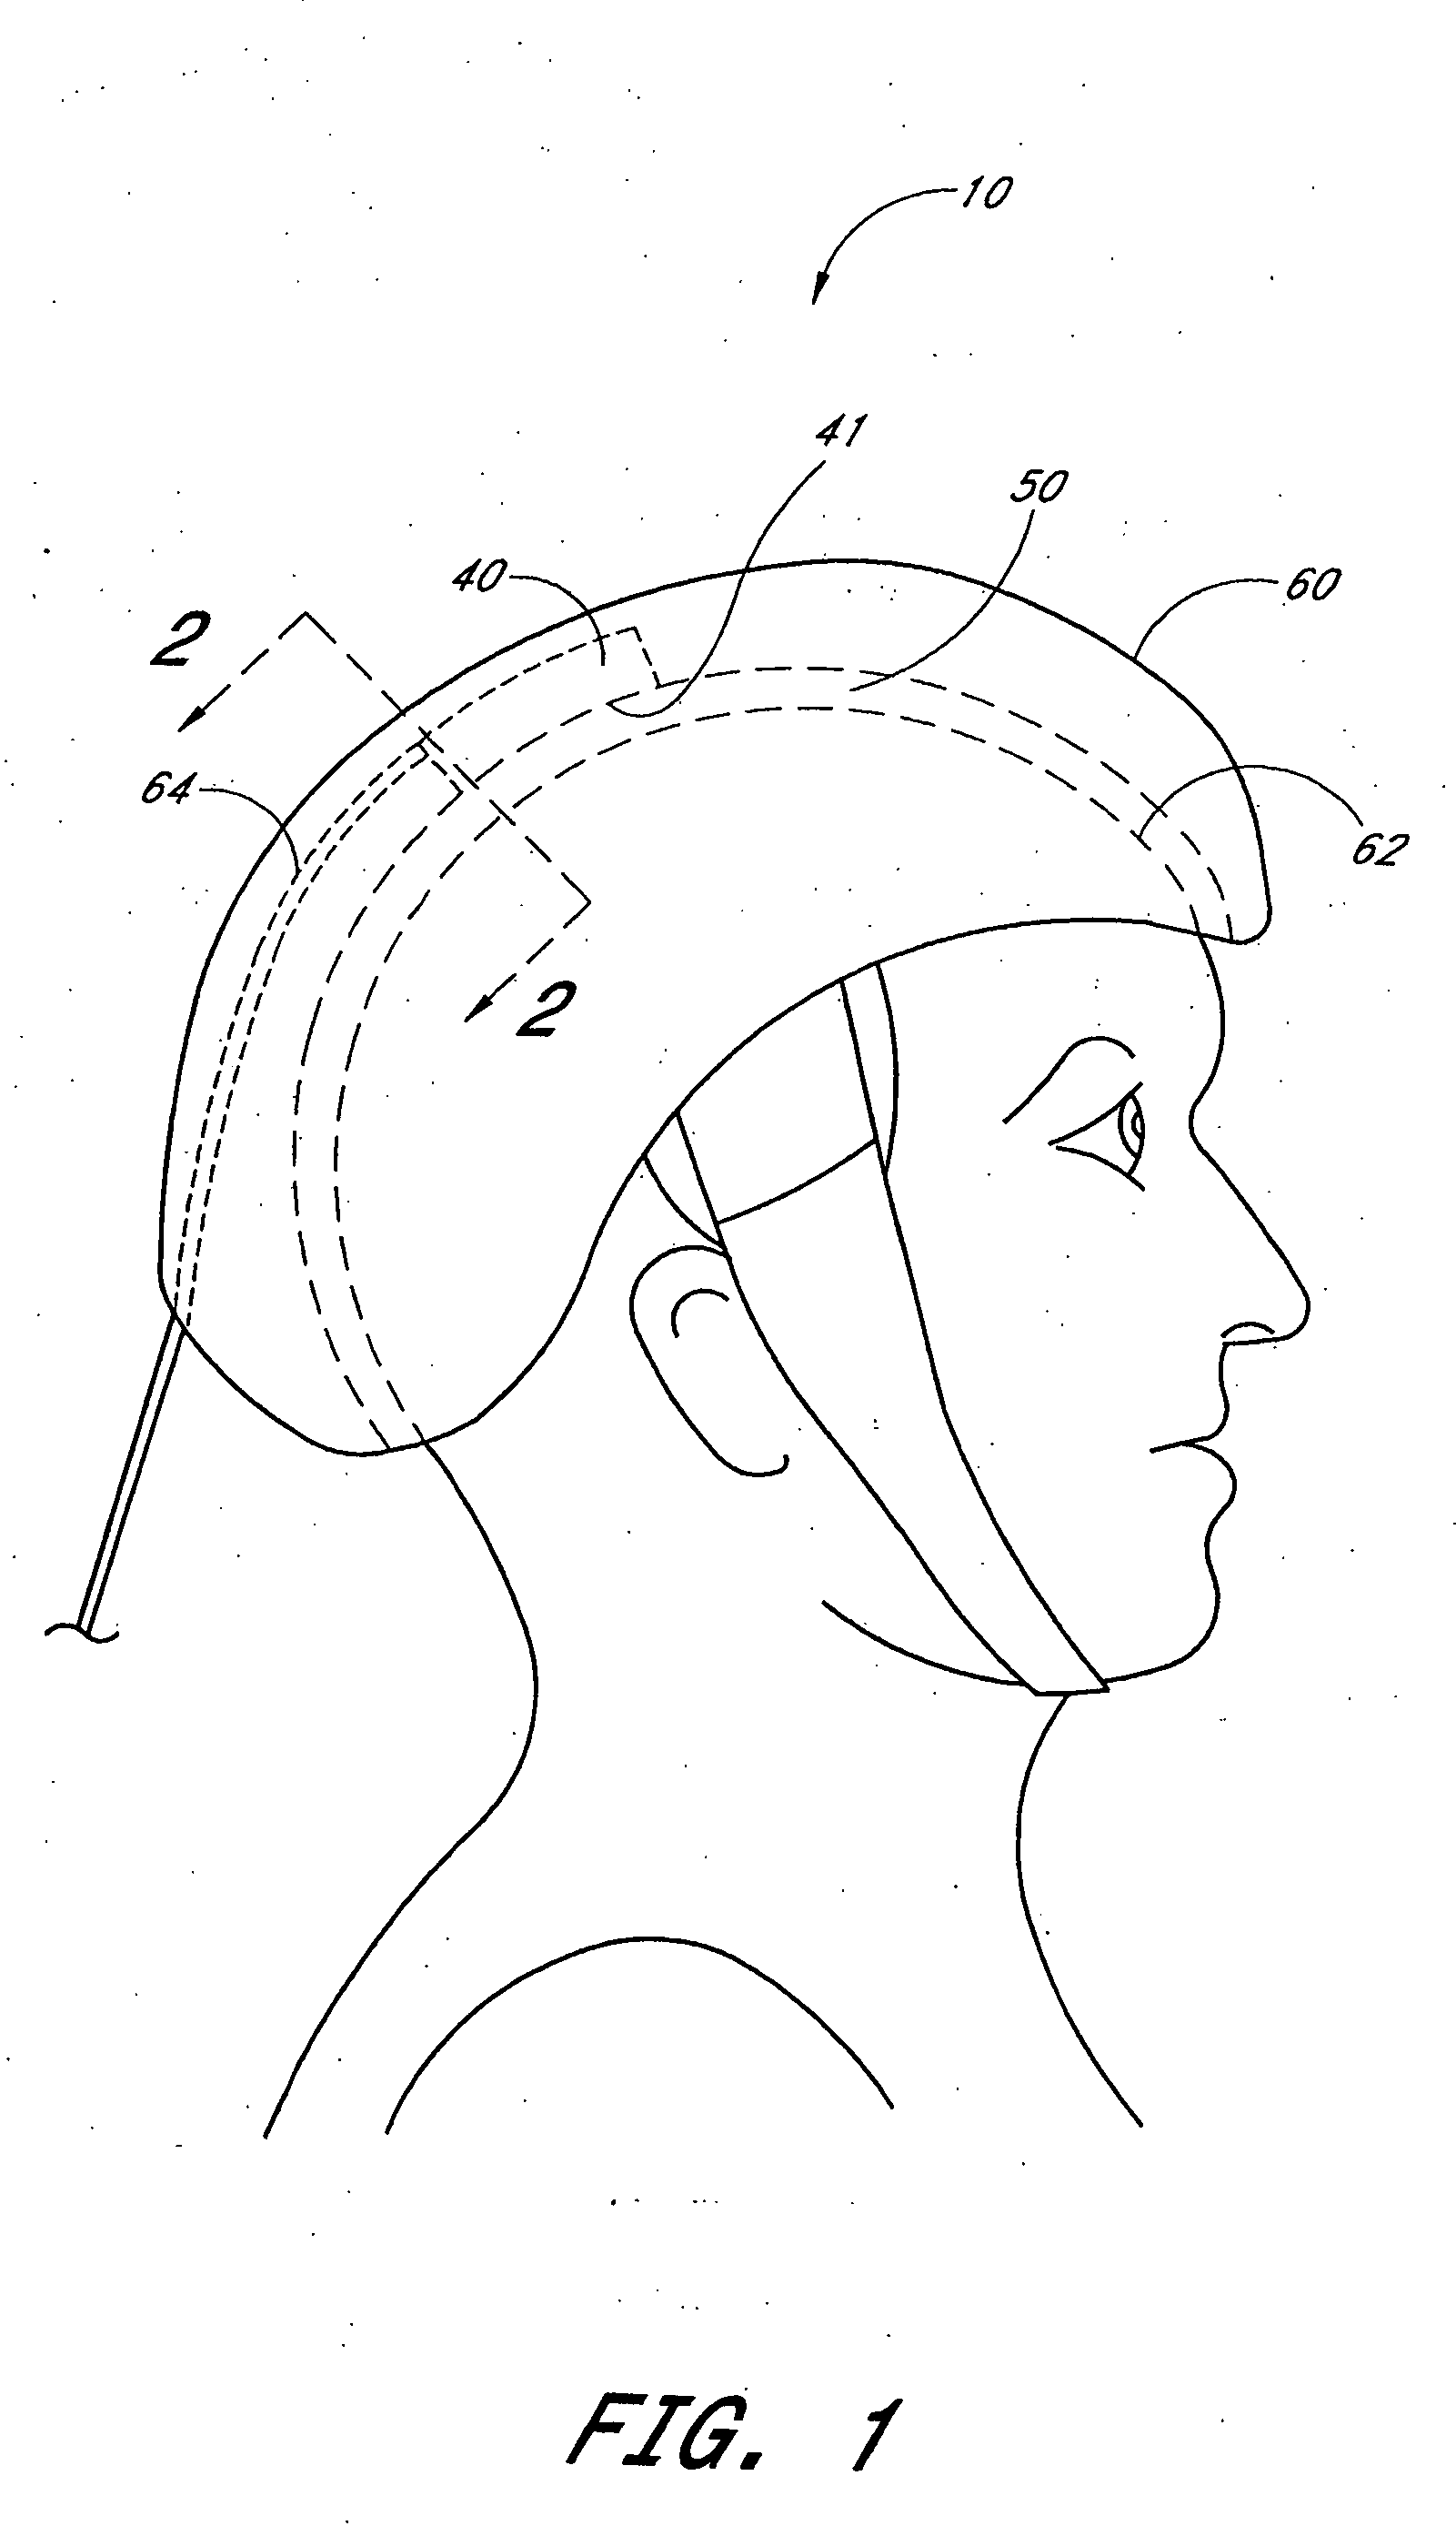 Device and method for providing phototherapy to the brain